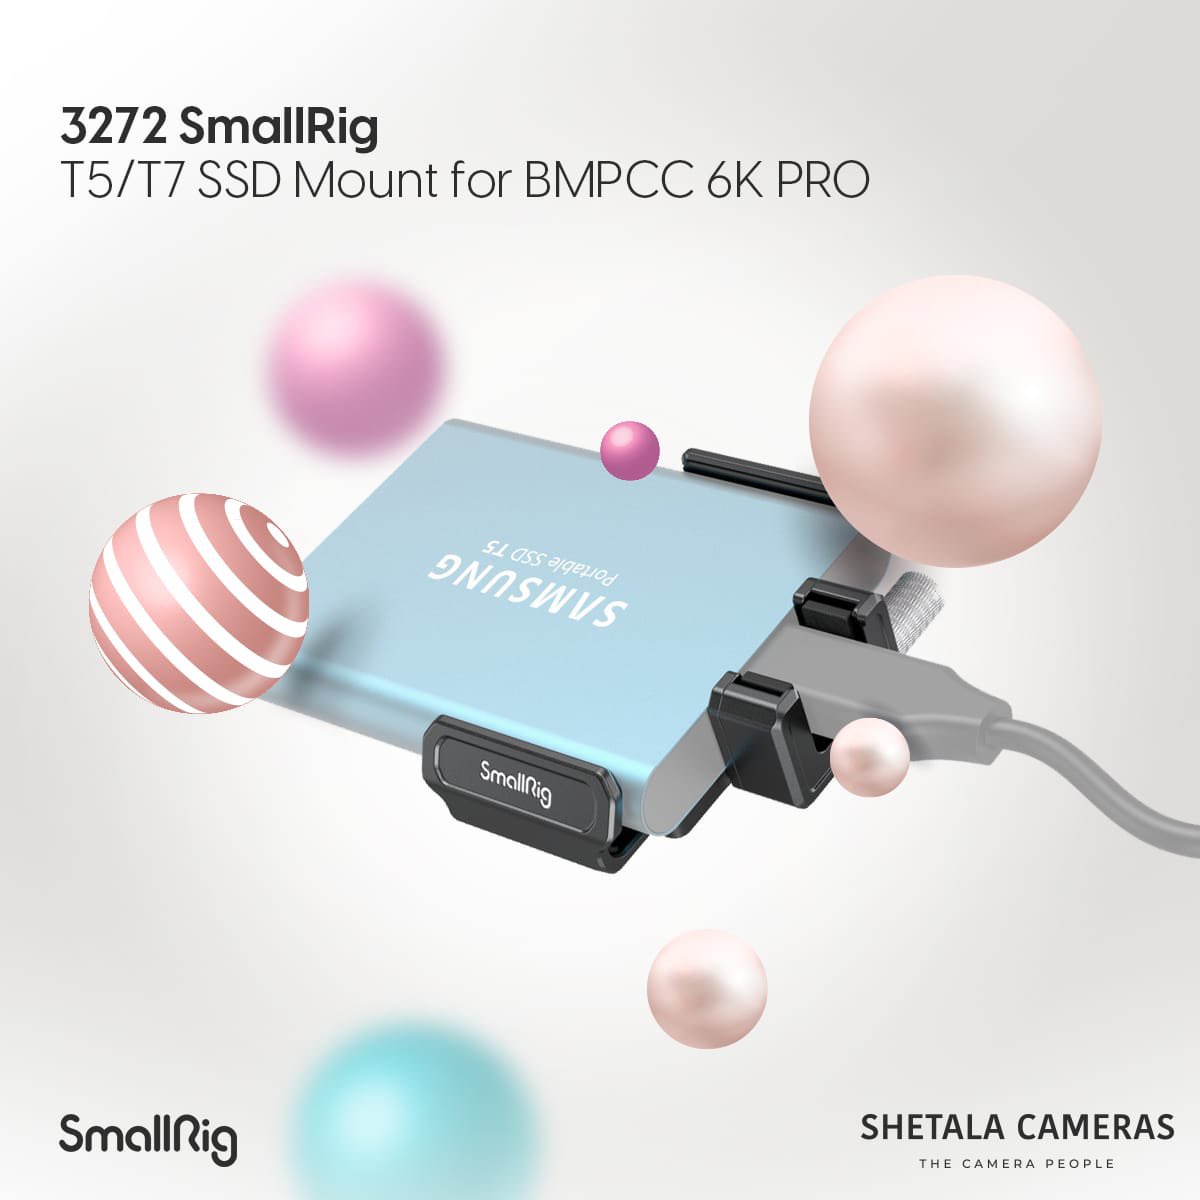 Securely mount your Samsung T5/T7 SSD to your BMPCC 6K PRO cage with the SmallRig T5/T7 SSD Mount 3272. Designed for easy attachment to the top left cold shoe, this mount keeps your SSD in place while shooting. Say goodbye to tangled cables and bulky mounts! 

#SSDMount #SmallRig